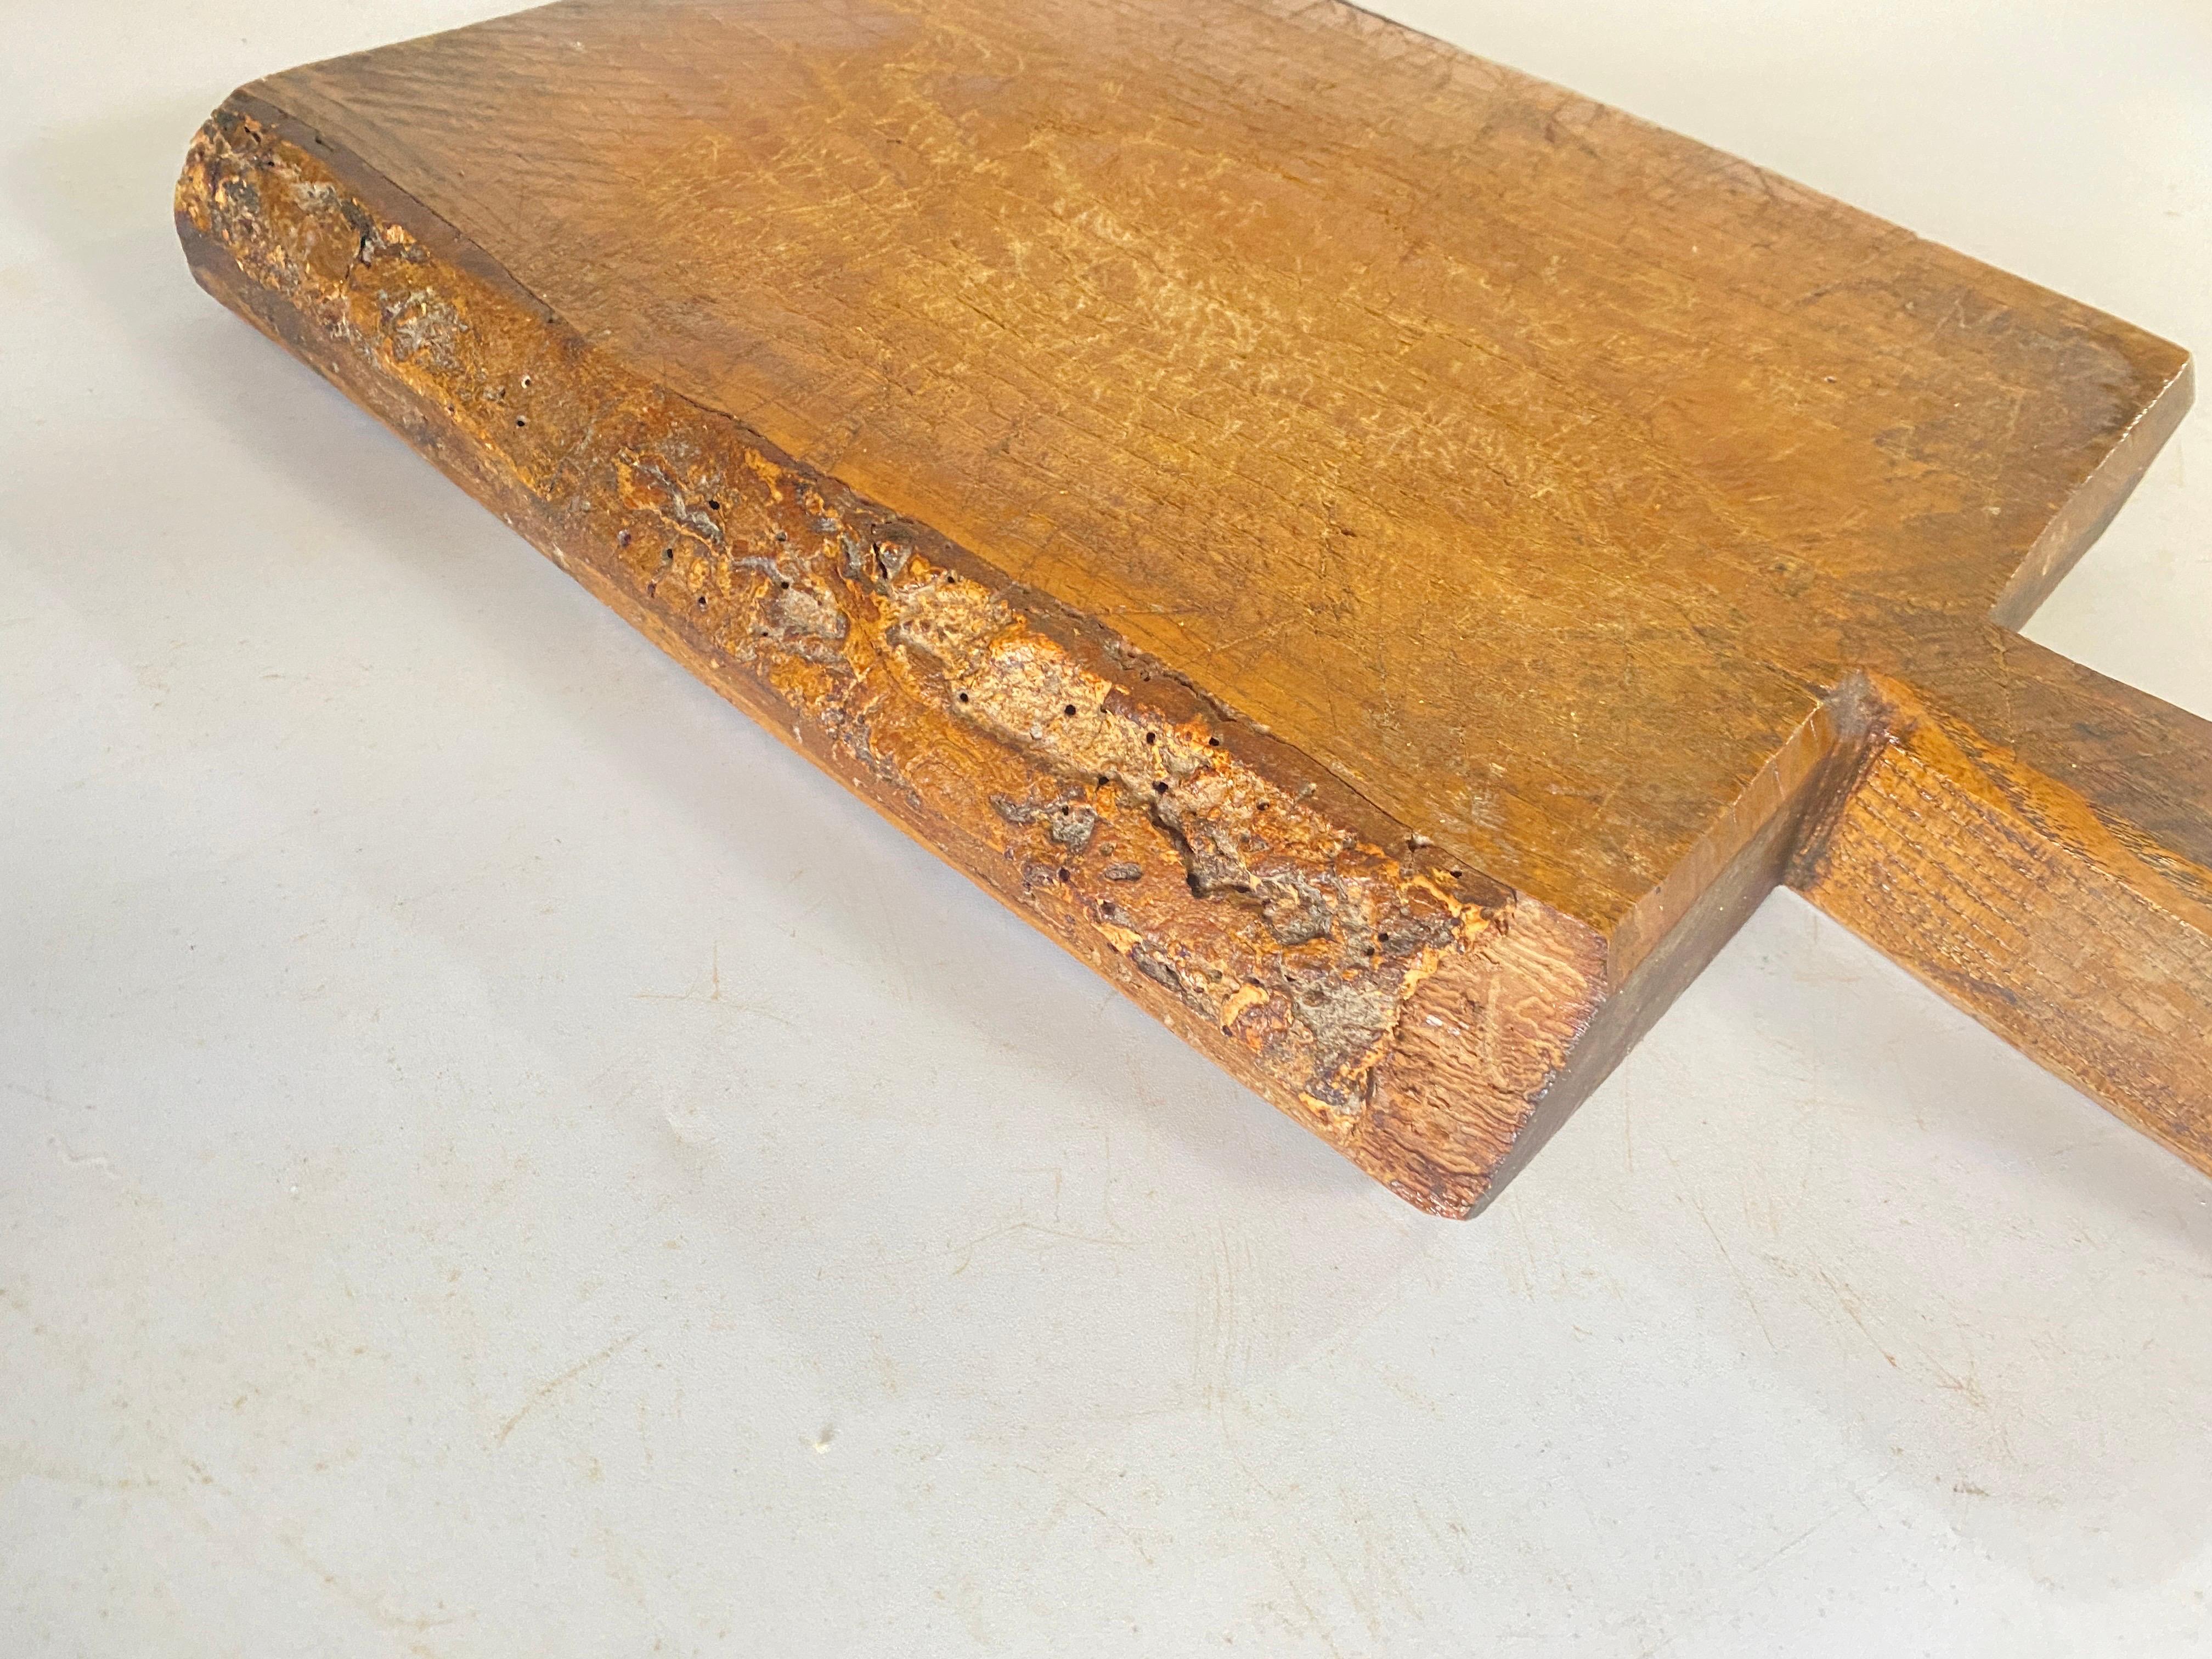 20th Century Large Wooden Chopping or Cutting Board Old Patina, Brown Color France 20th  For Sale